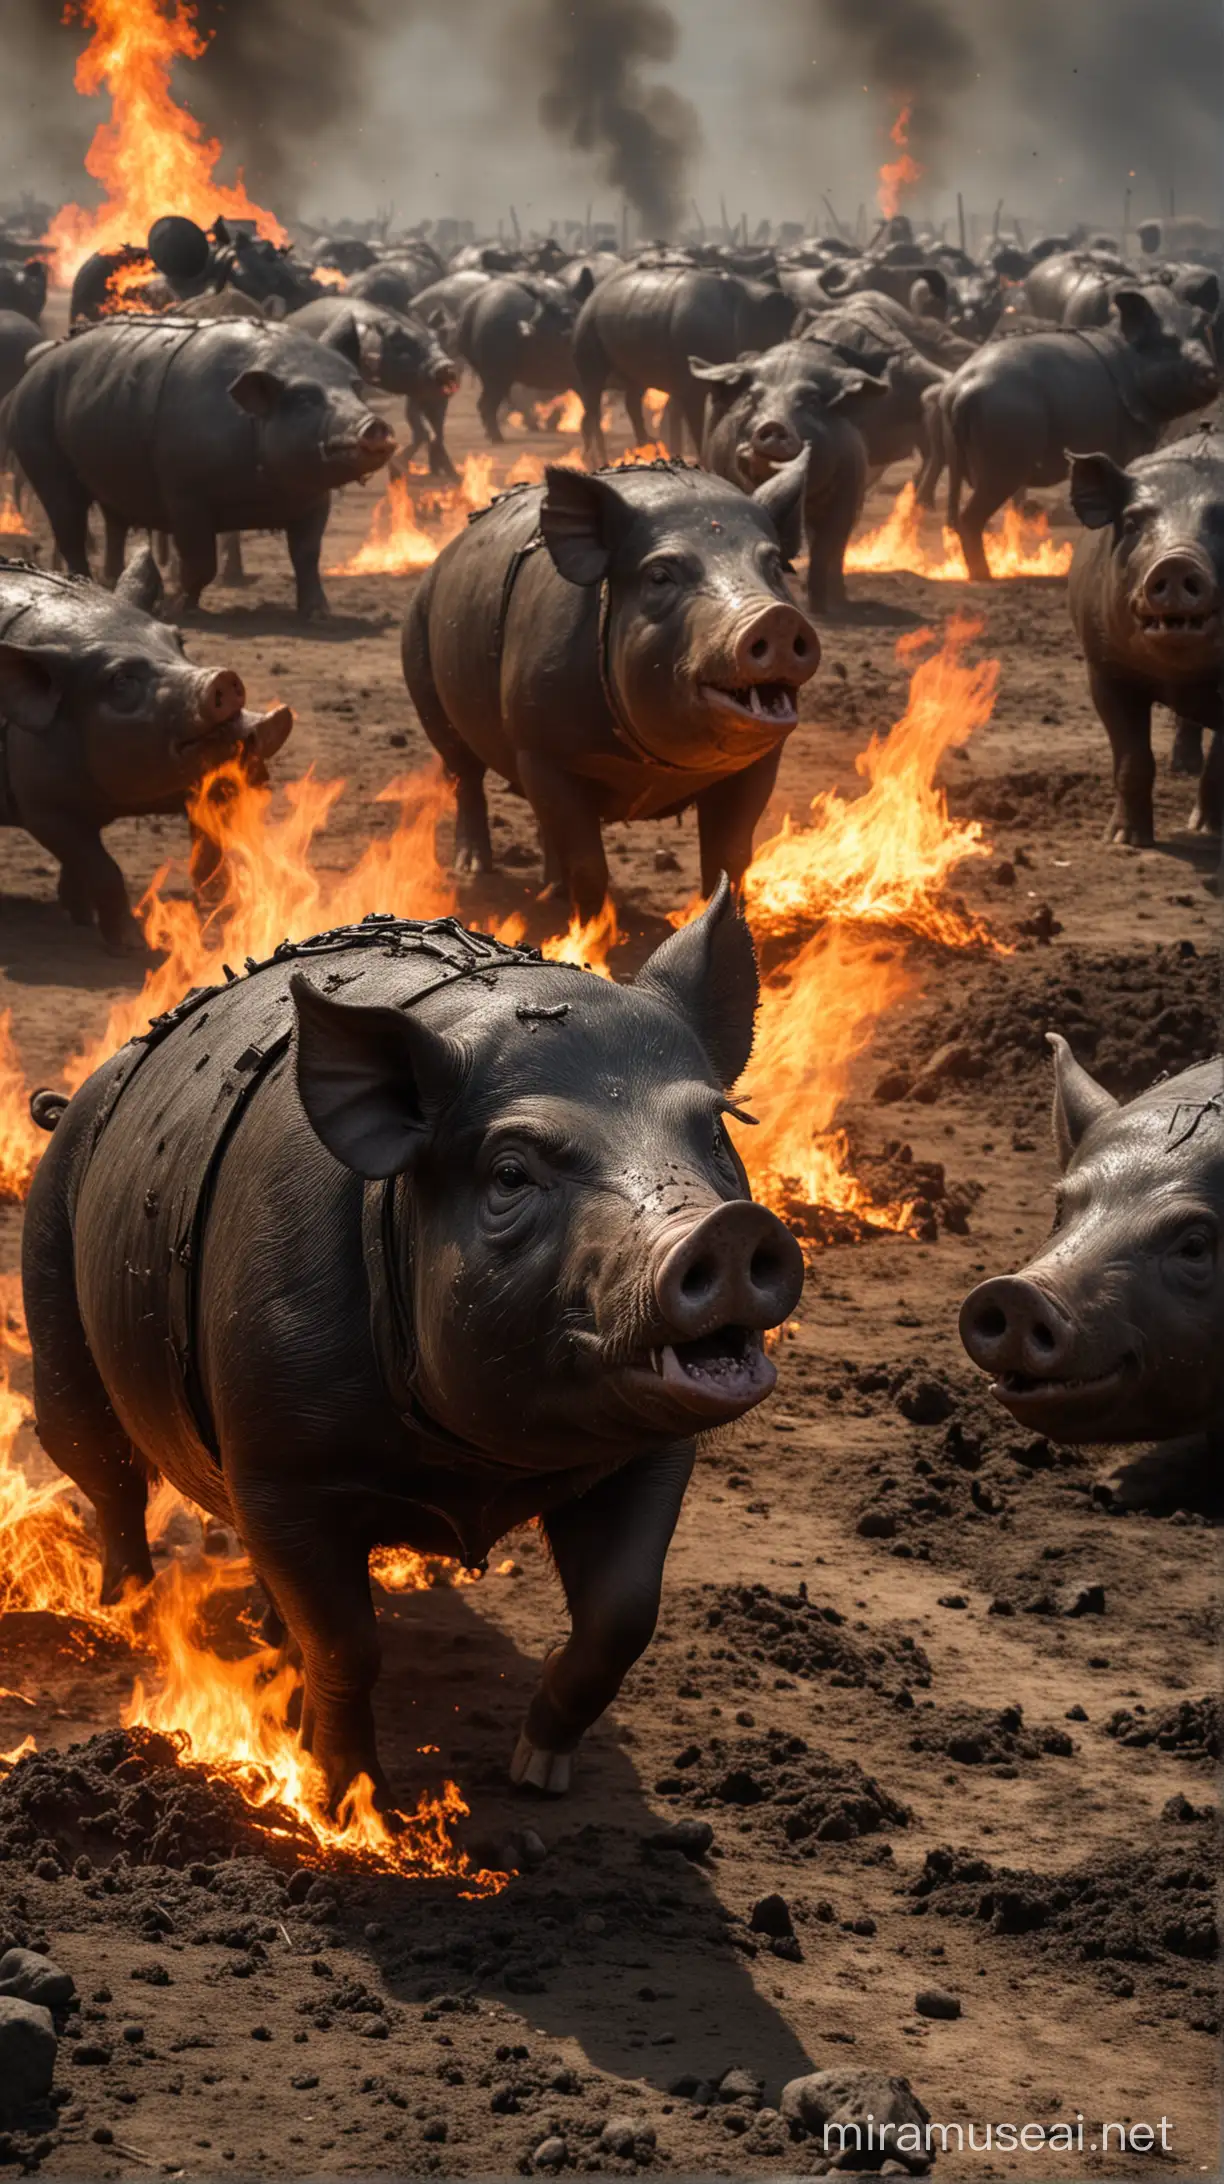 War Pigs: One of the ancient war strategies was the use of war pigs. According to this strategy, pigs were covered with tar and then set on fire before being sent to enemy lines to cause chaos. In the visual, the fiery state of the war pigs and their advancement towards the battlefield can be depicted in detail.

